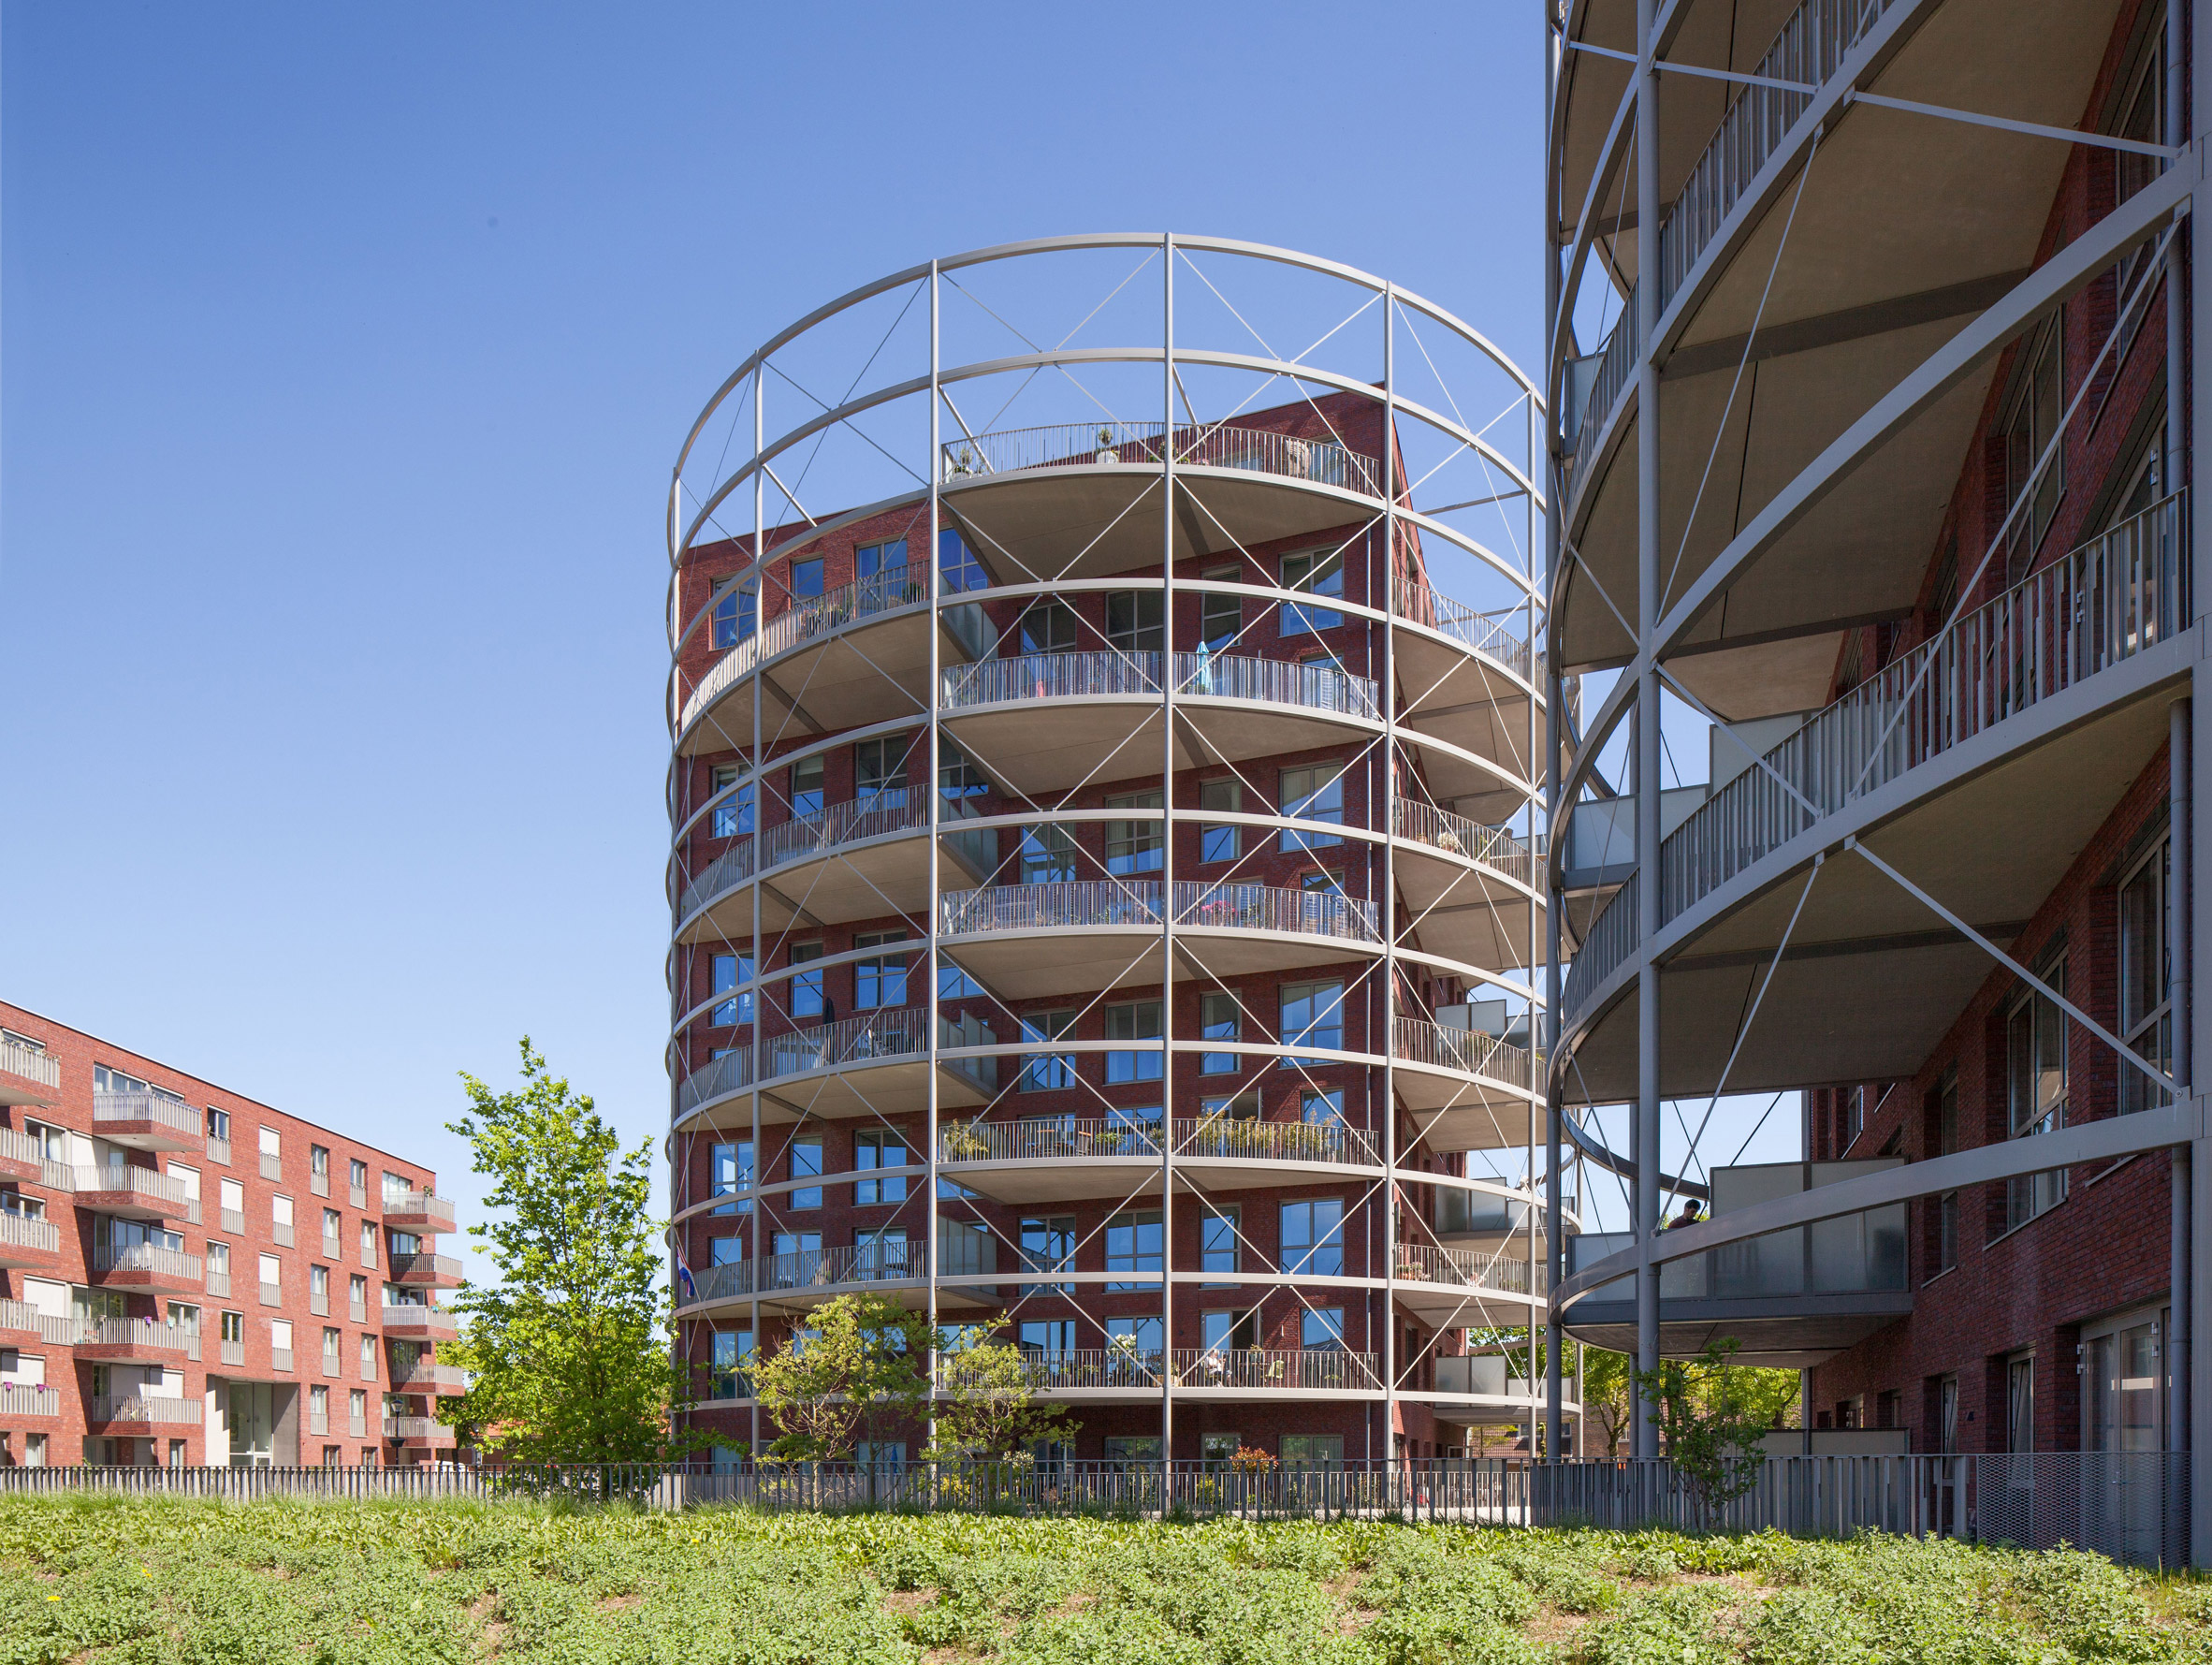 Mecanoo's cylindrical apartments designed to recall gasholders